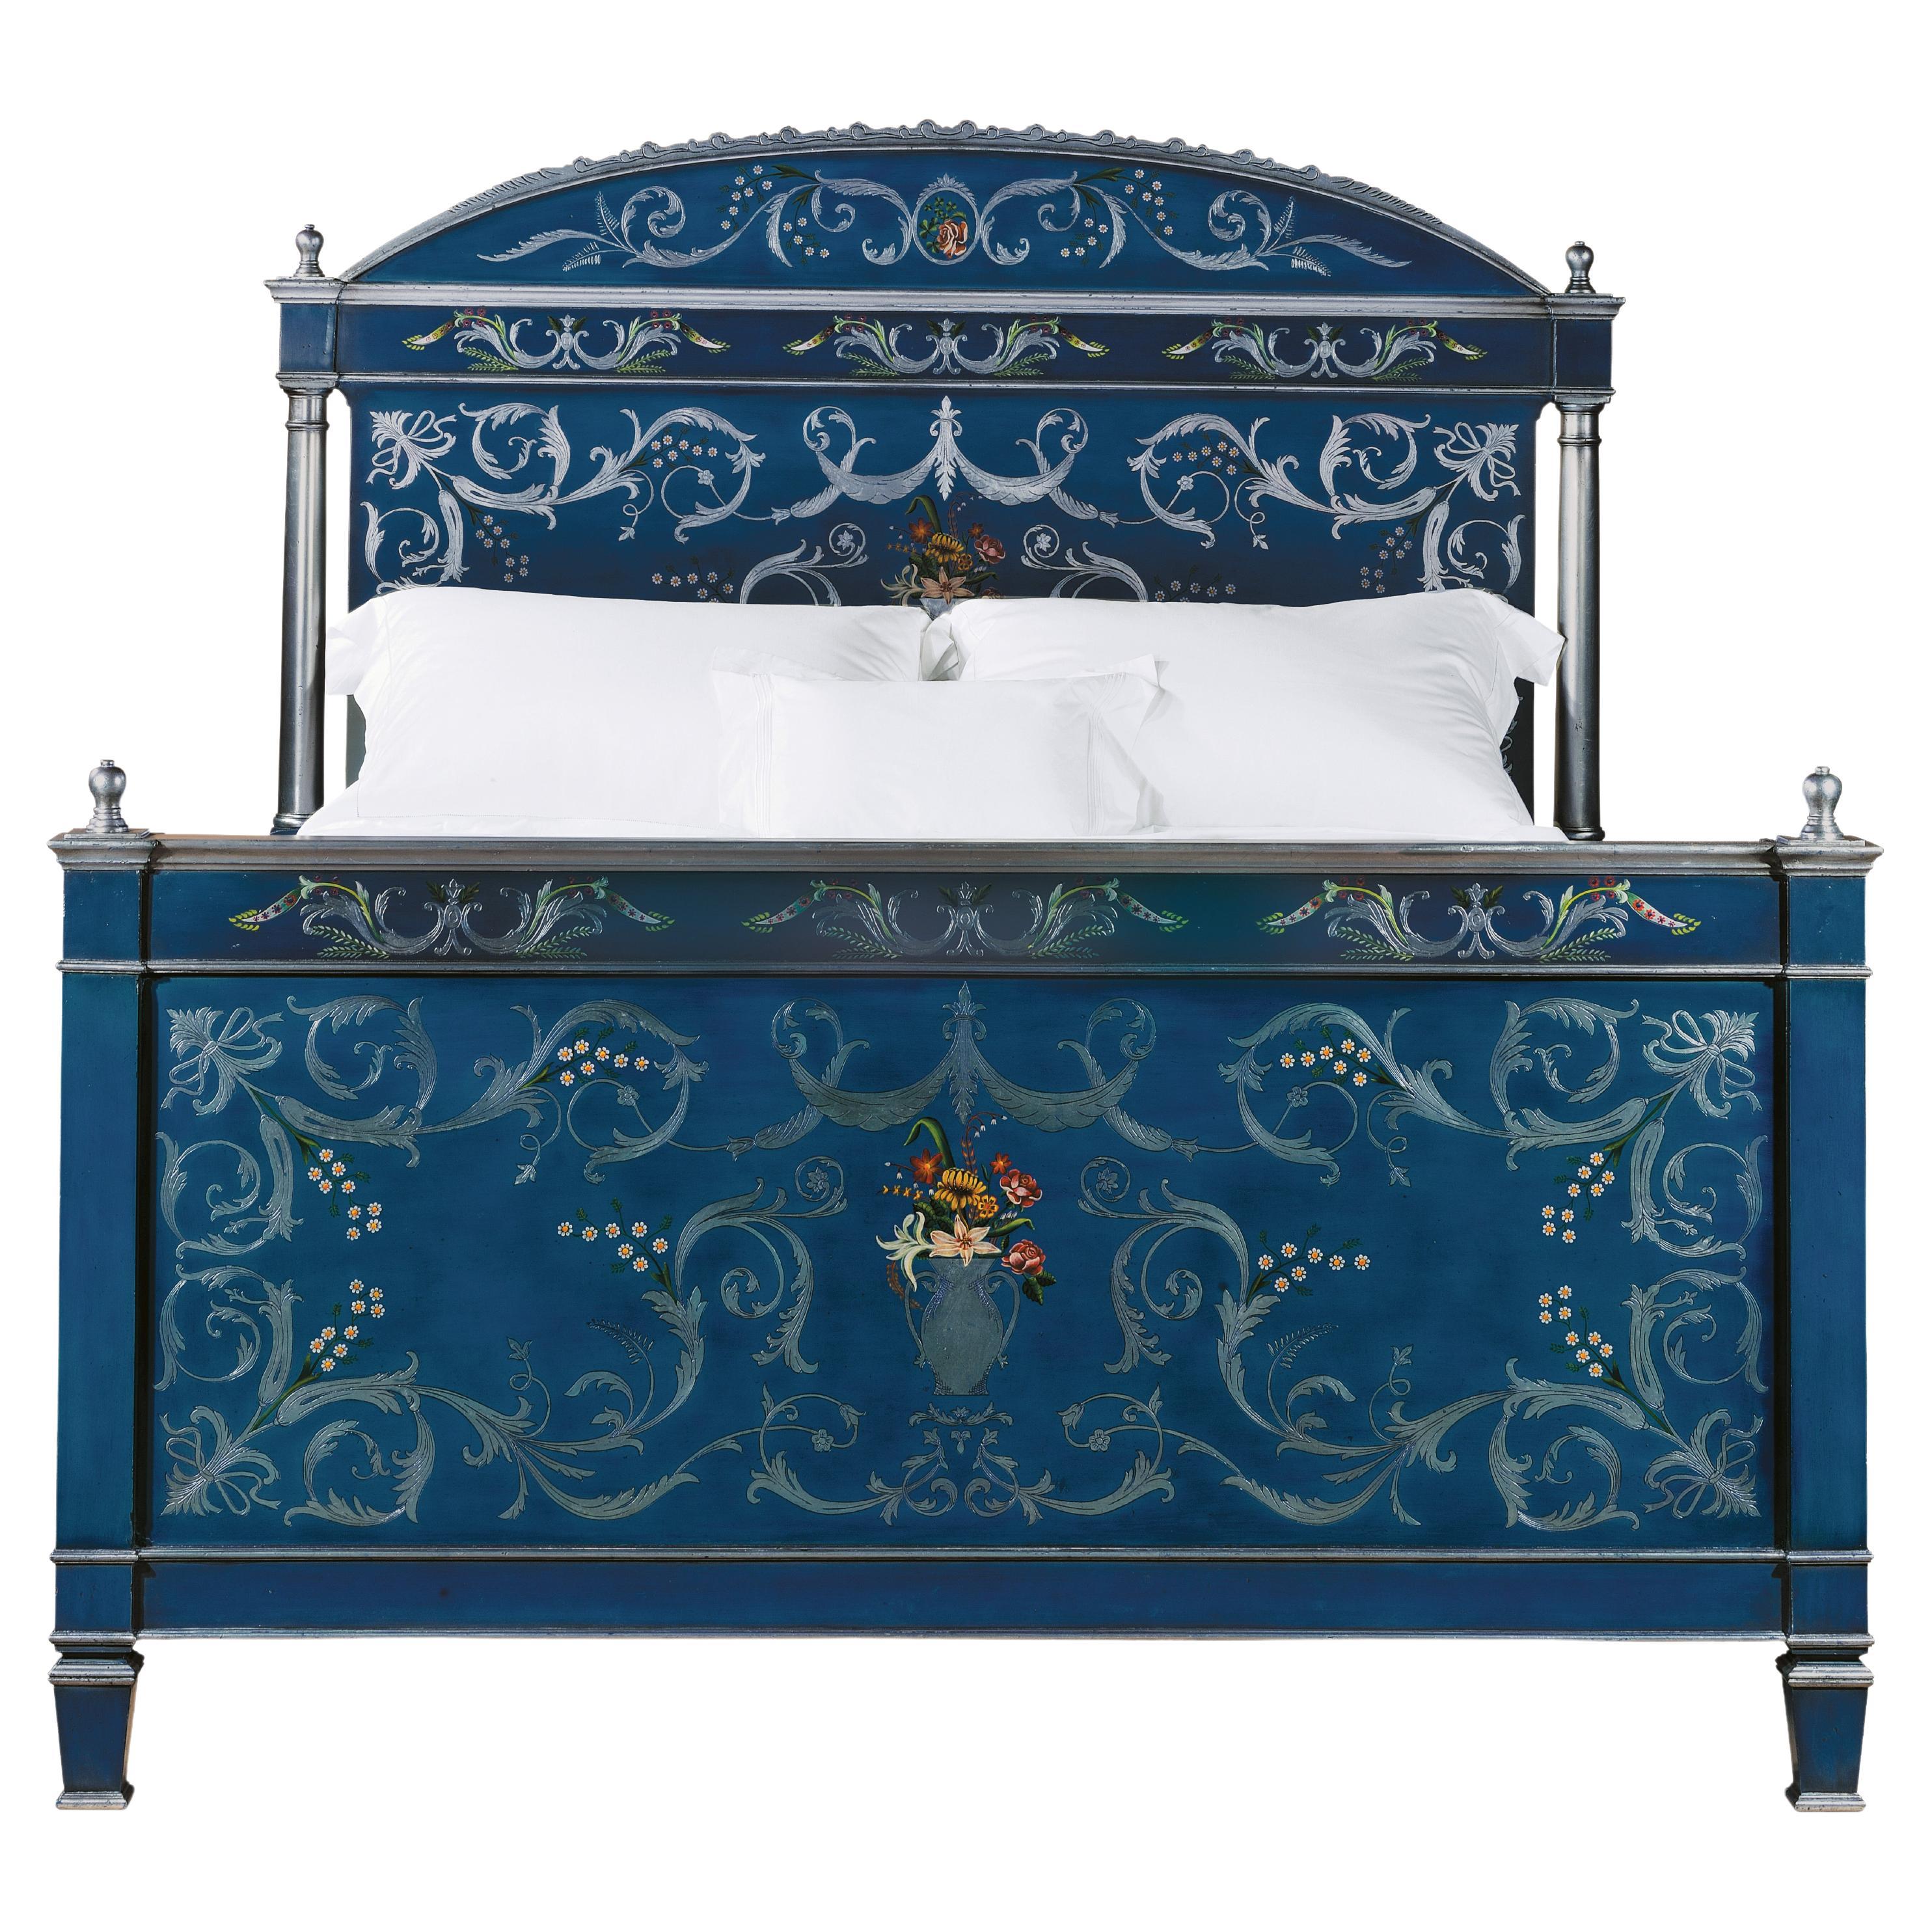 French with Italian Influence Style Hand-Painted Flandes Bed